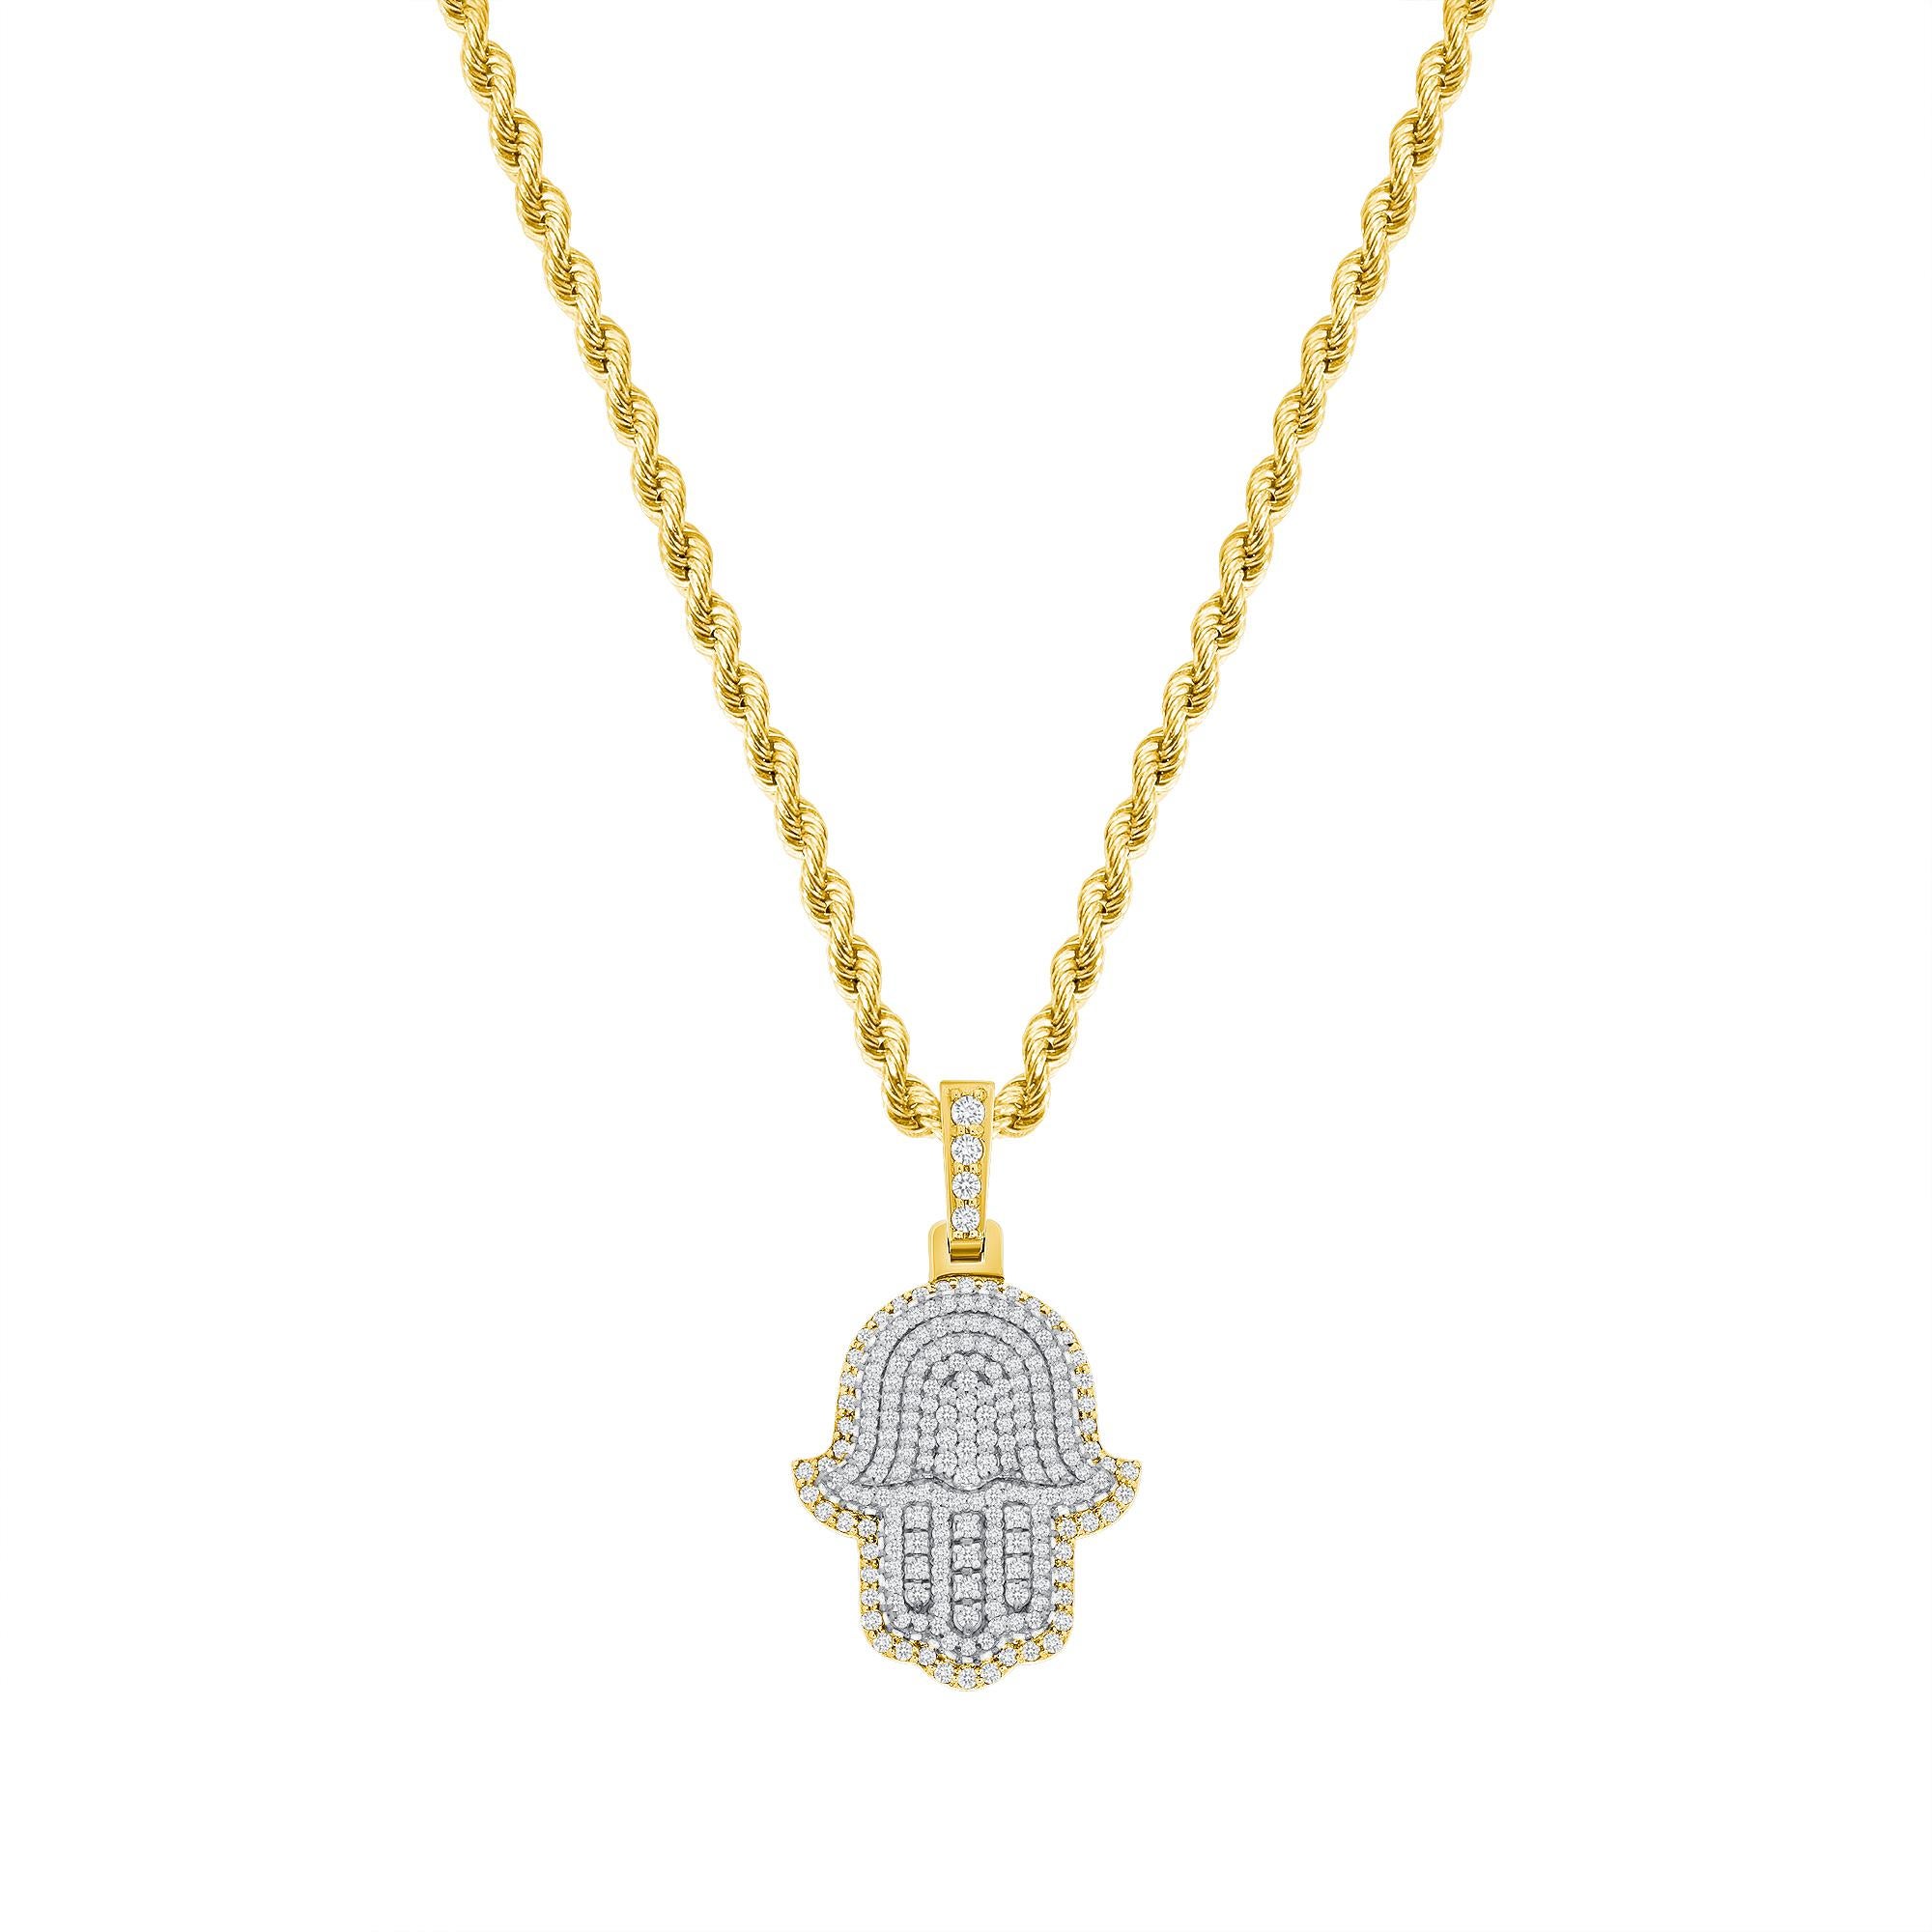 This Hamsa diamond necklace provides both a spiritual and fashionable on trend look. 

Metal: 14k Gold
Diamond Cut: Round
Total Diamond Carats: 2 Carats
Diamond Clarity: VS
Diamond Color: F-G
Necklace Length: 20 Inches
Color: Yellow Gold
